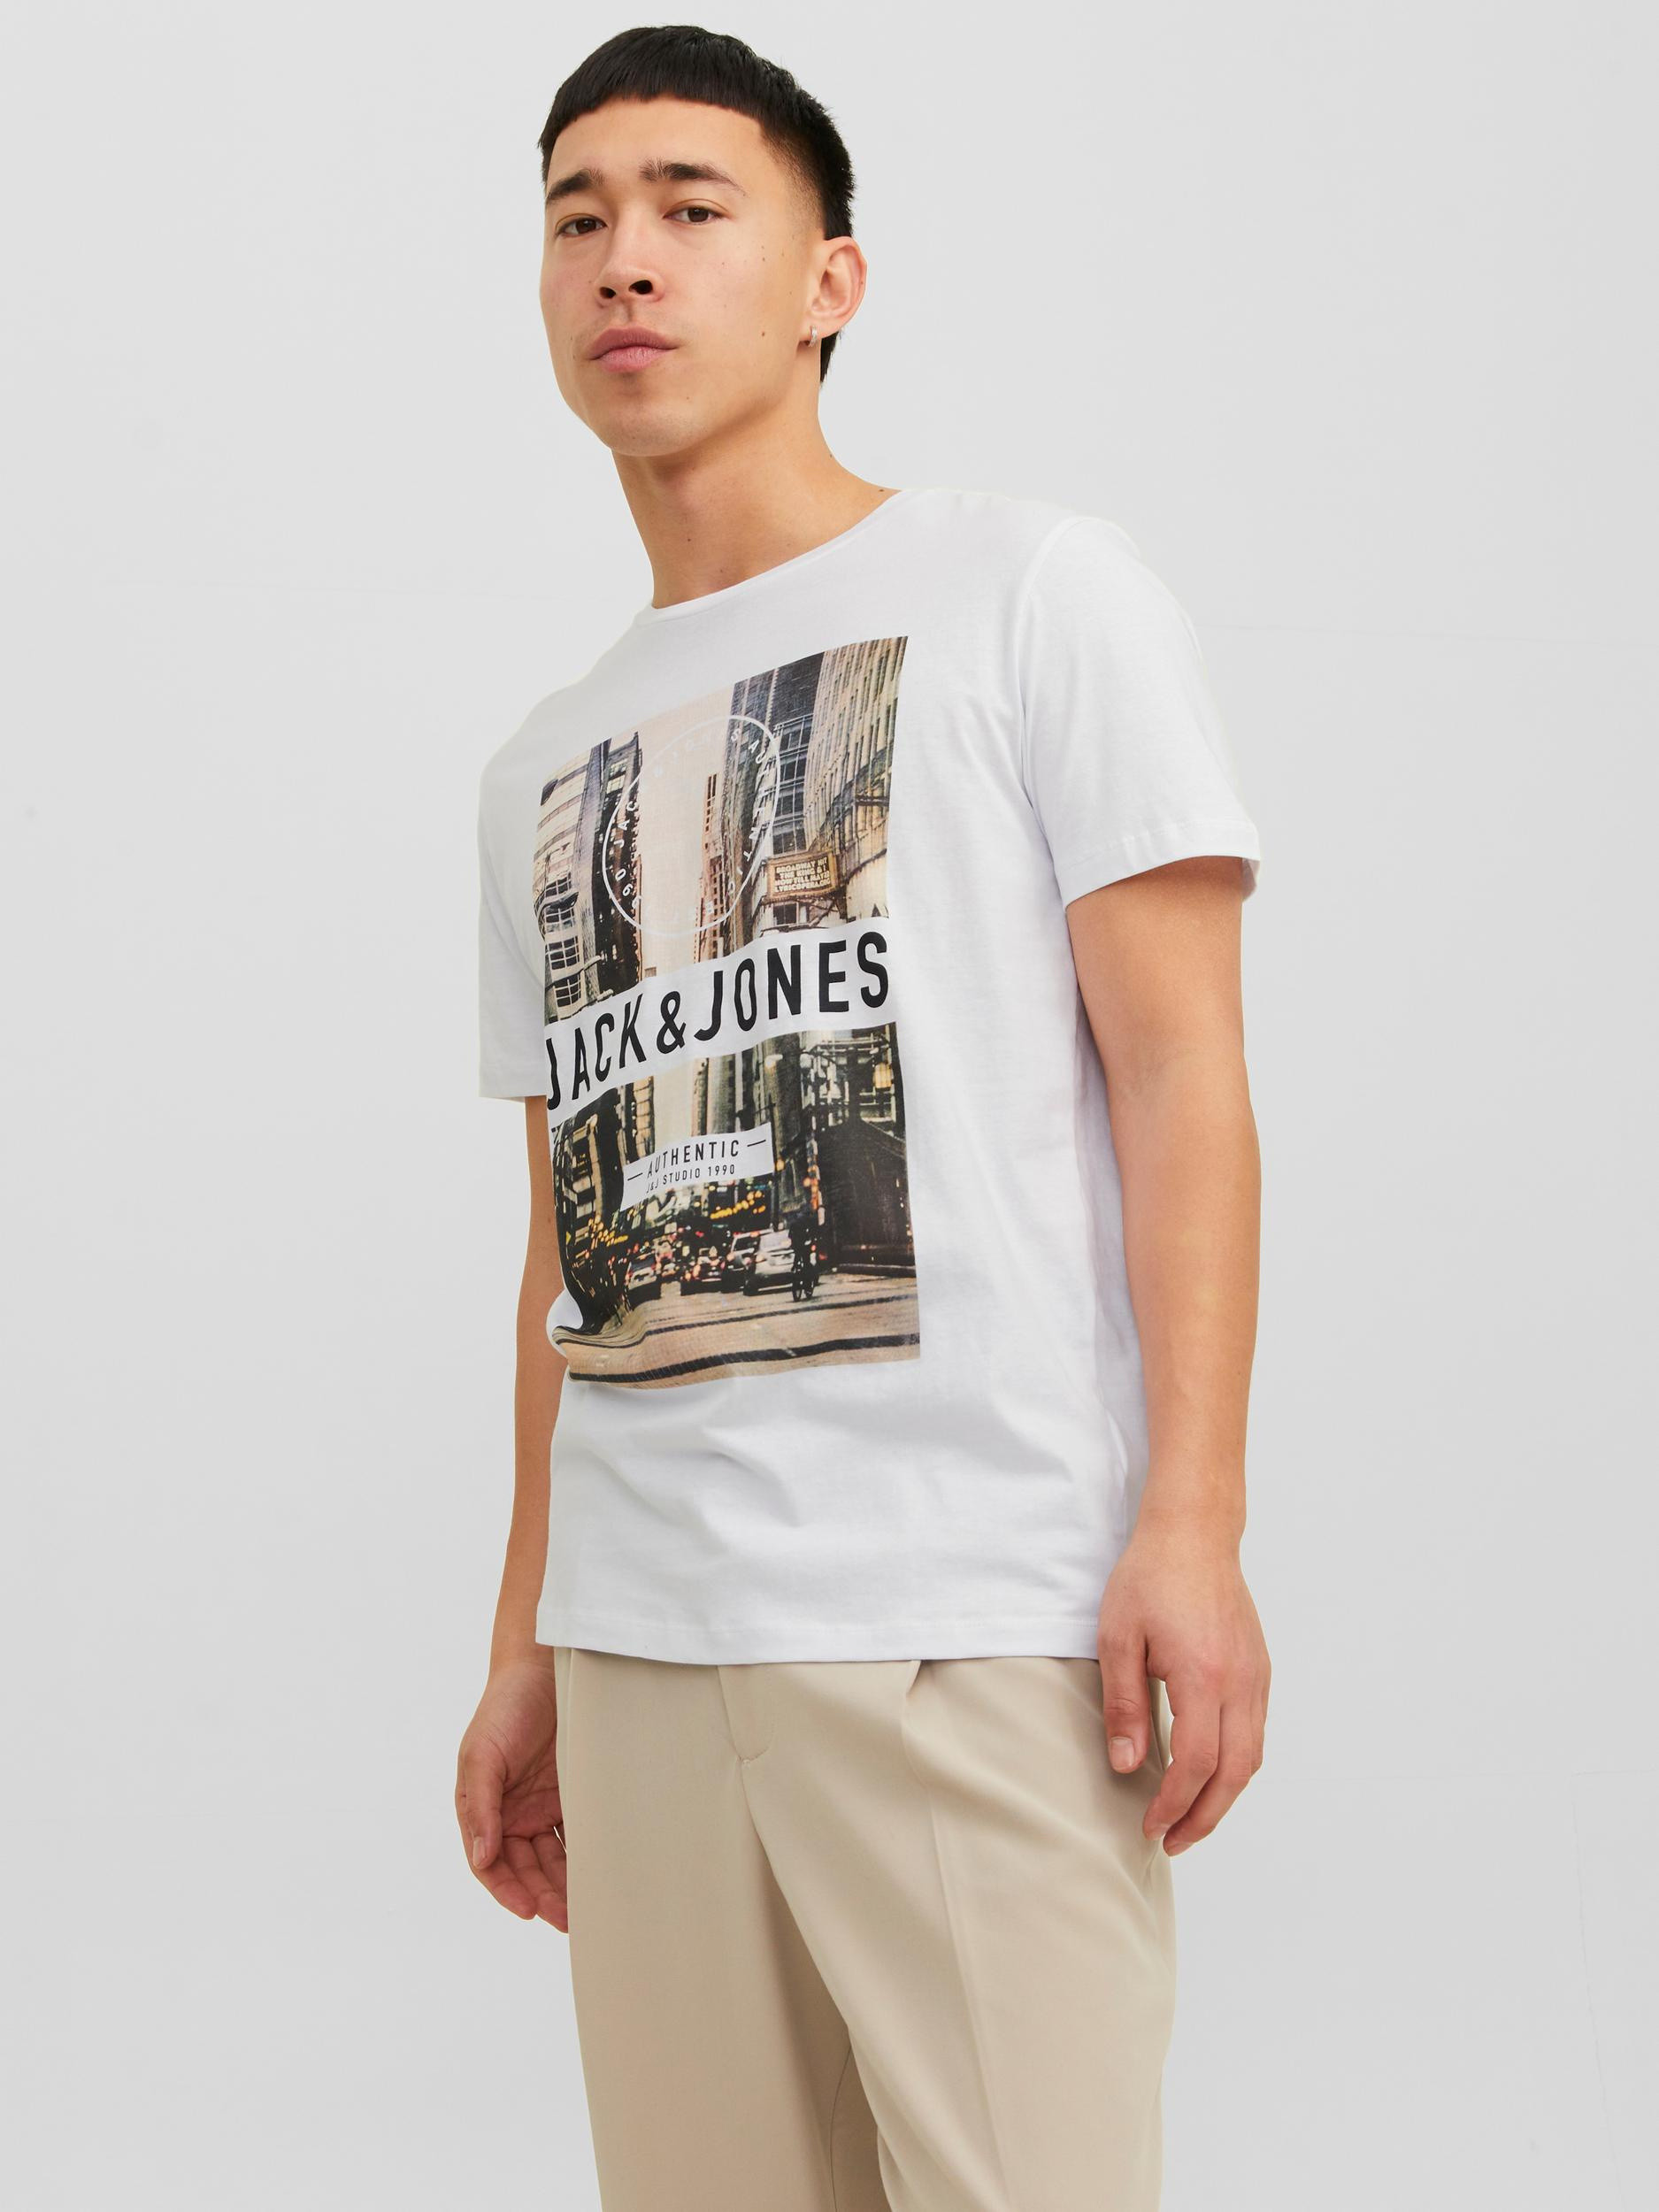 Jack & Jones -T-shirt in cotone con stampa, Bianco, large image number 3